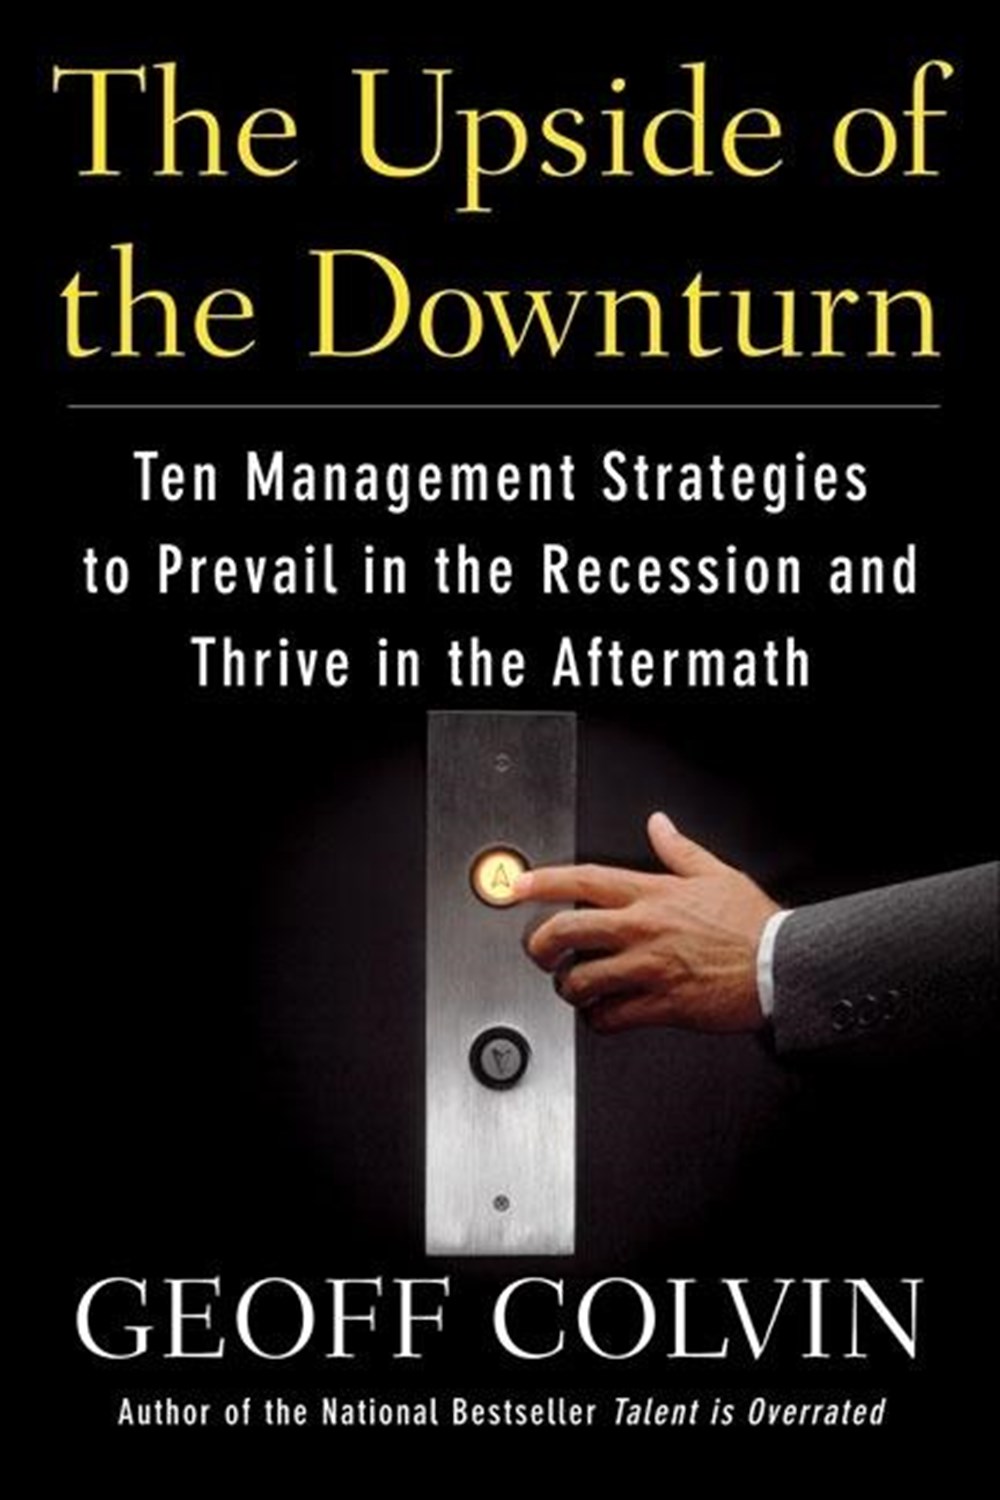 Upside of the Downturn Ten Management Strategies to Prevail in the Recession and Thrive in the After